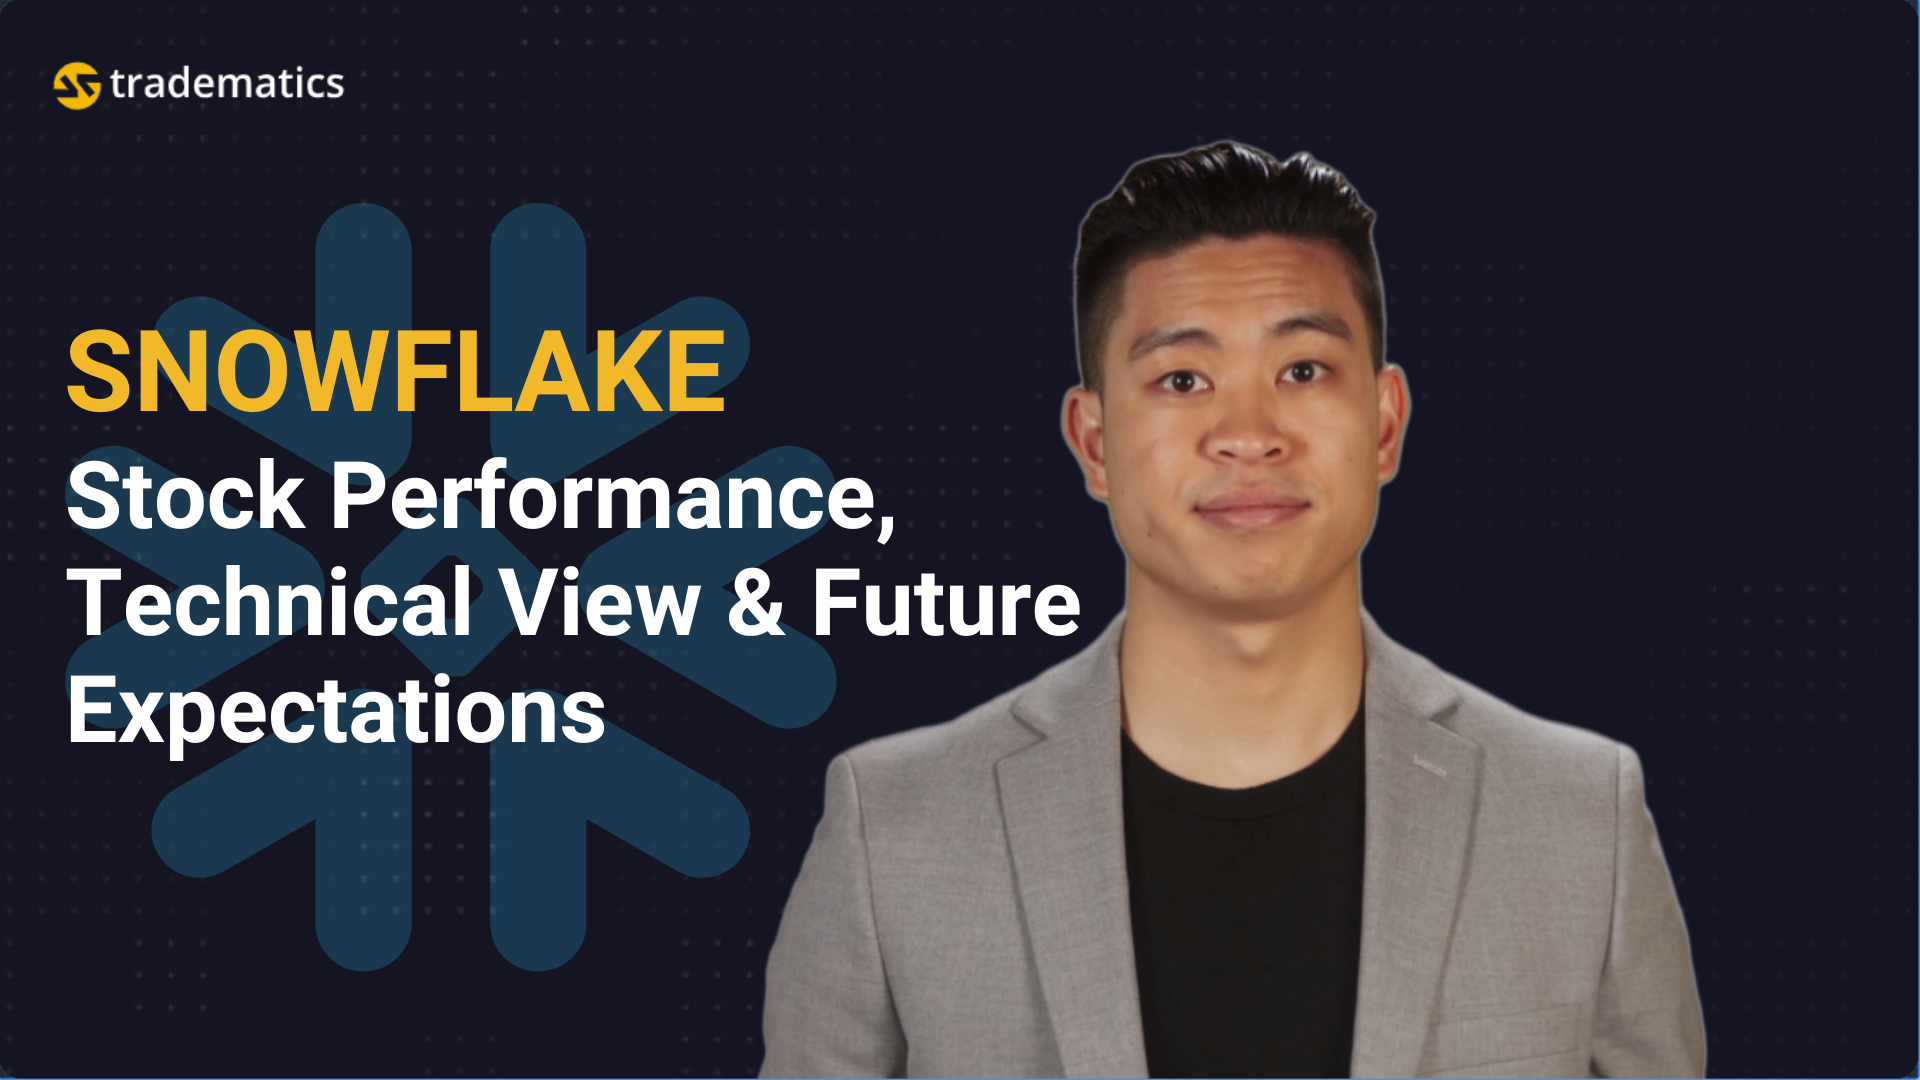 Tradematics | #20 SNOWFLAKE | Stock Performance, Technical View & Future Expectations